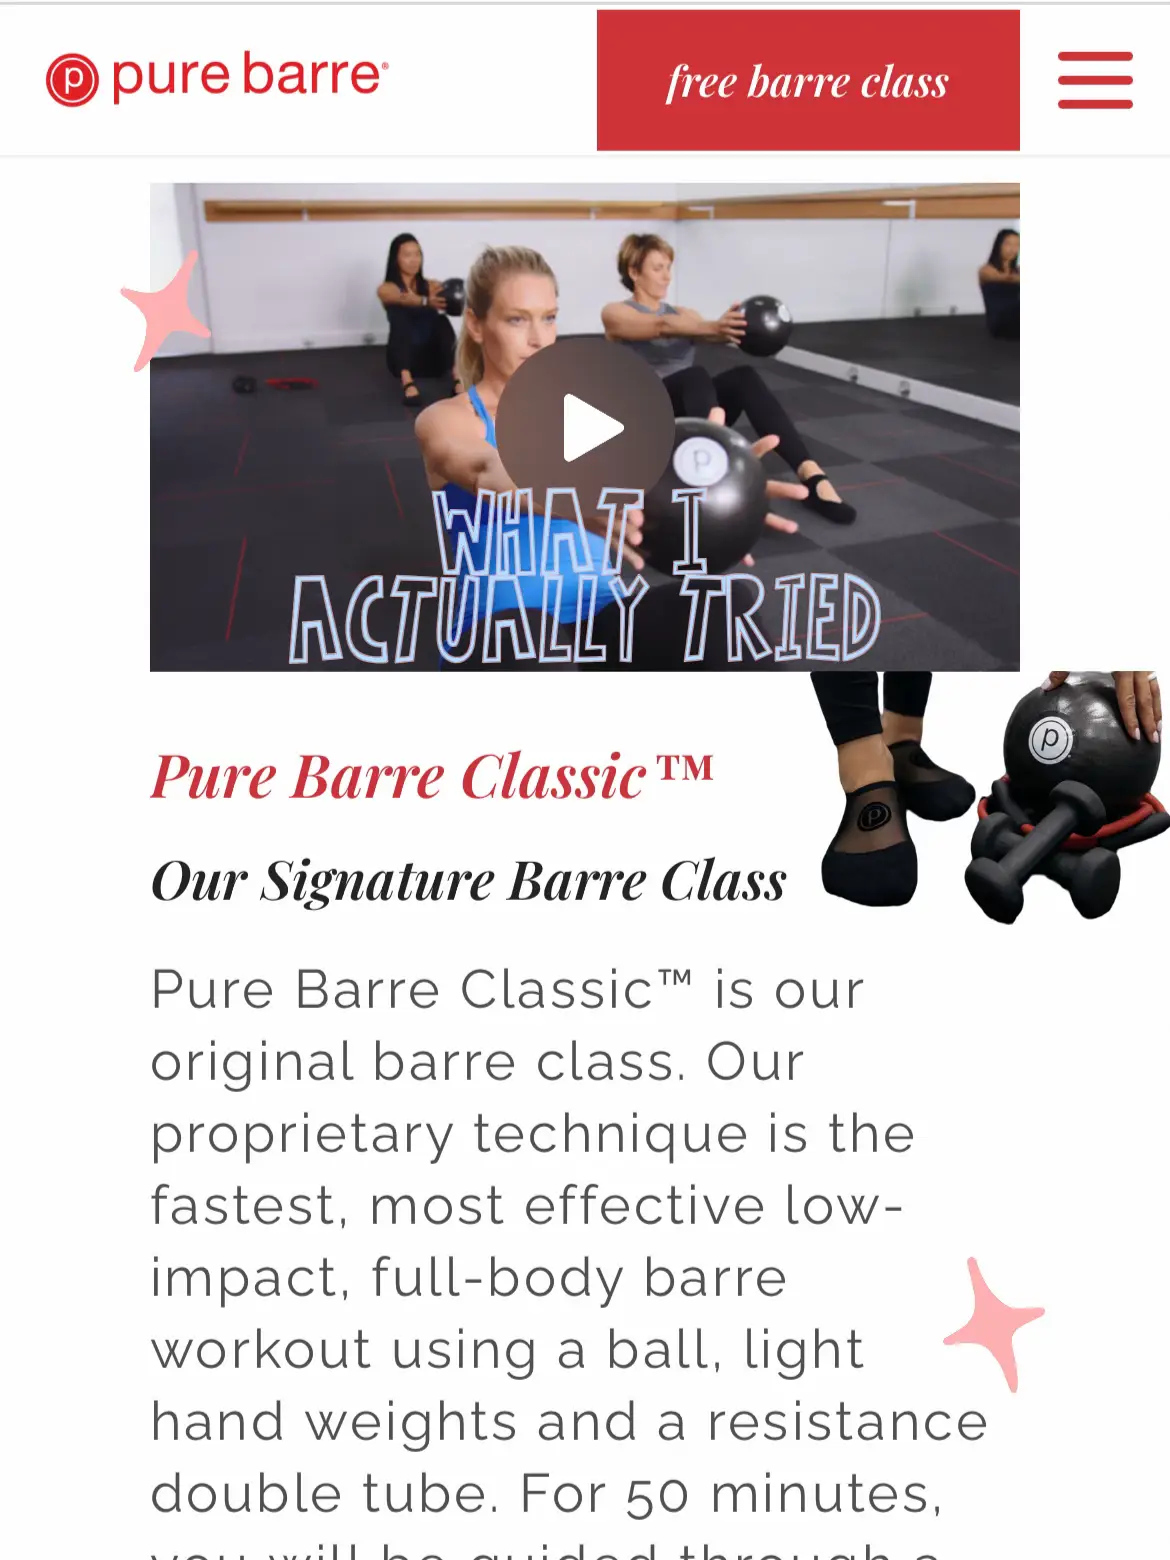 One Hour Barre Inspired Workout with Theraband, No barre needed